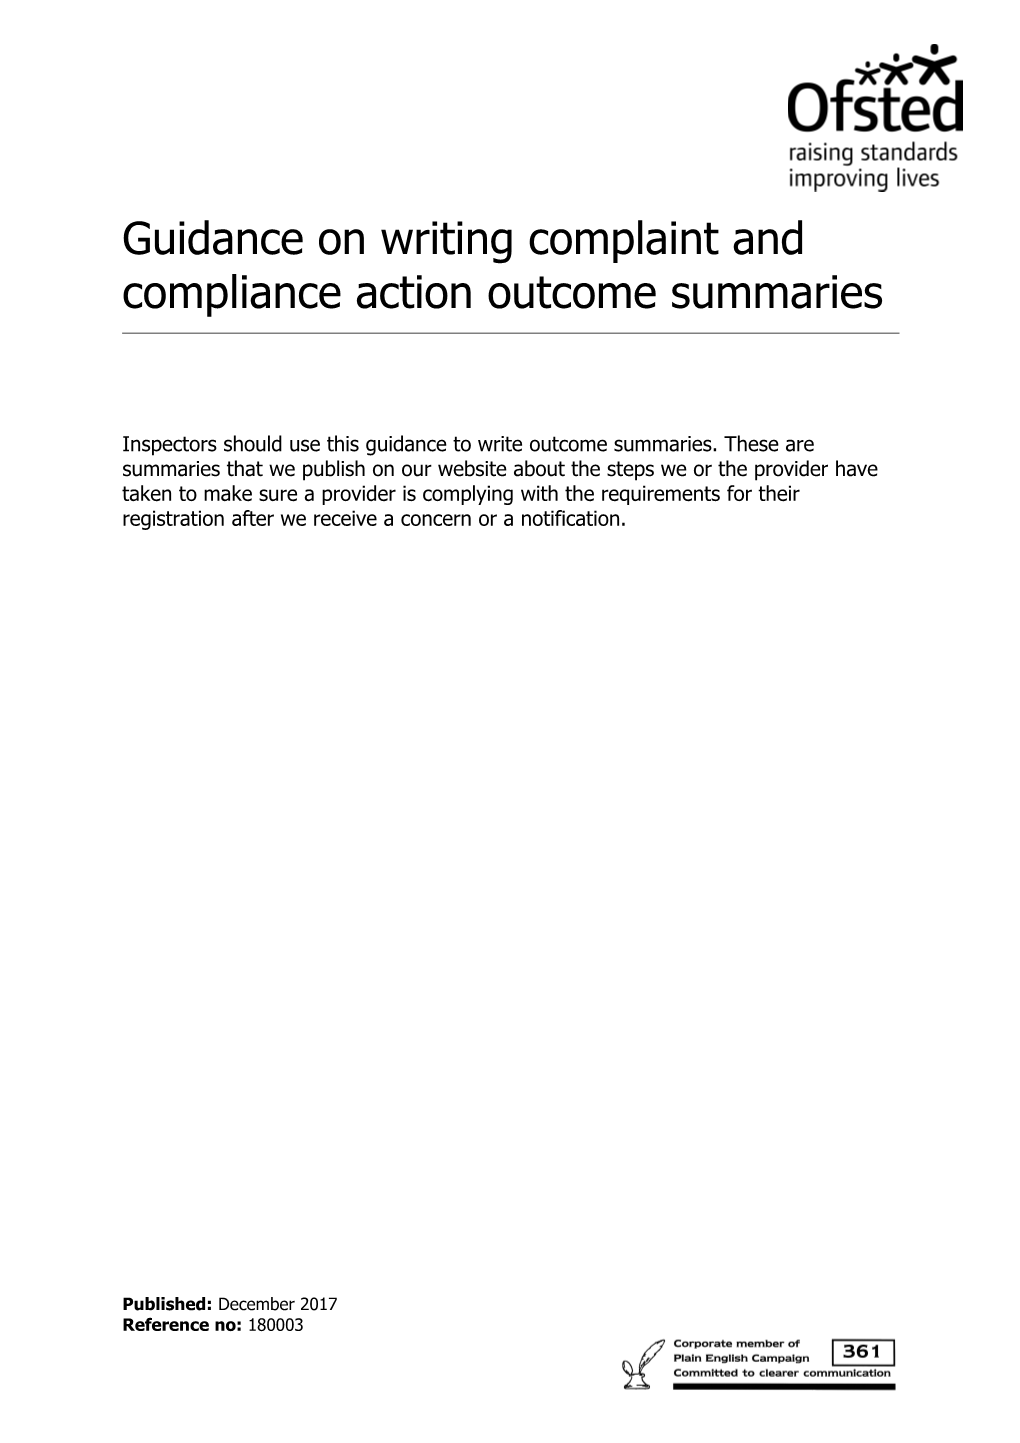 Guidance on Writing Complaint and Compliance Action Outcome Summaries